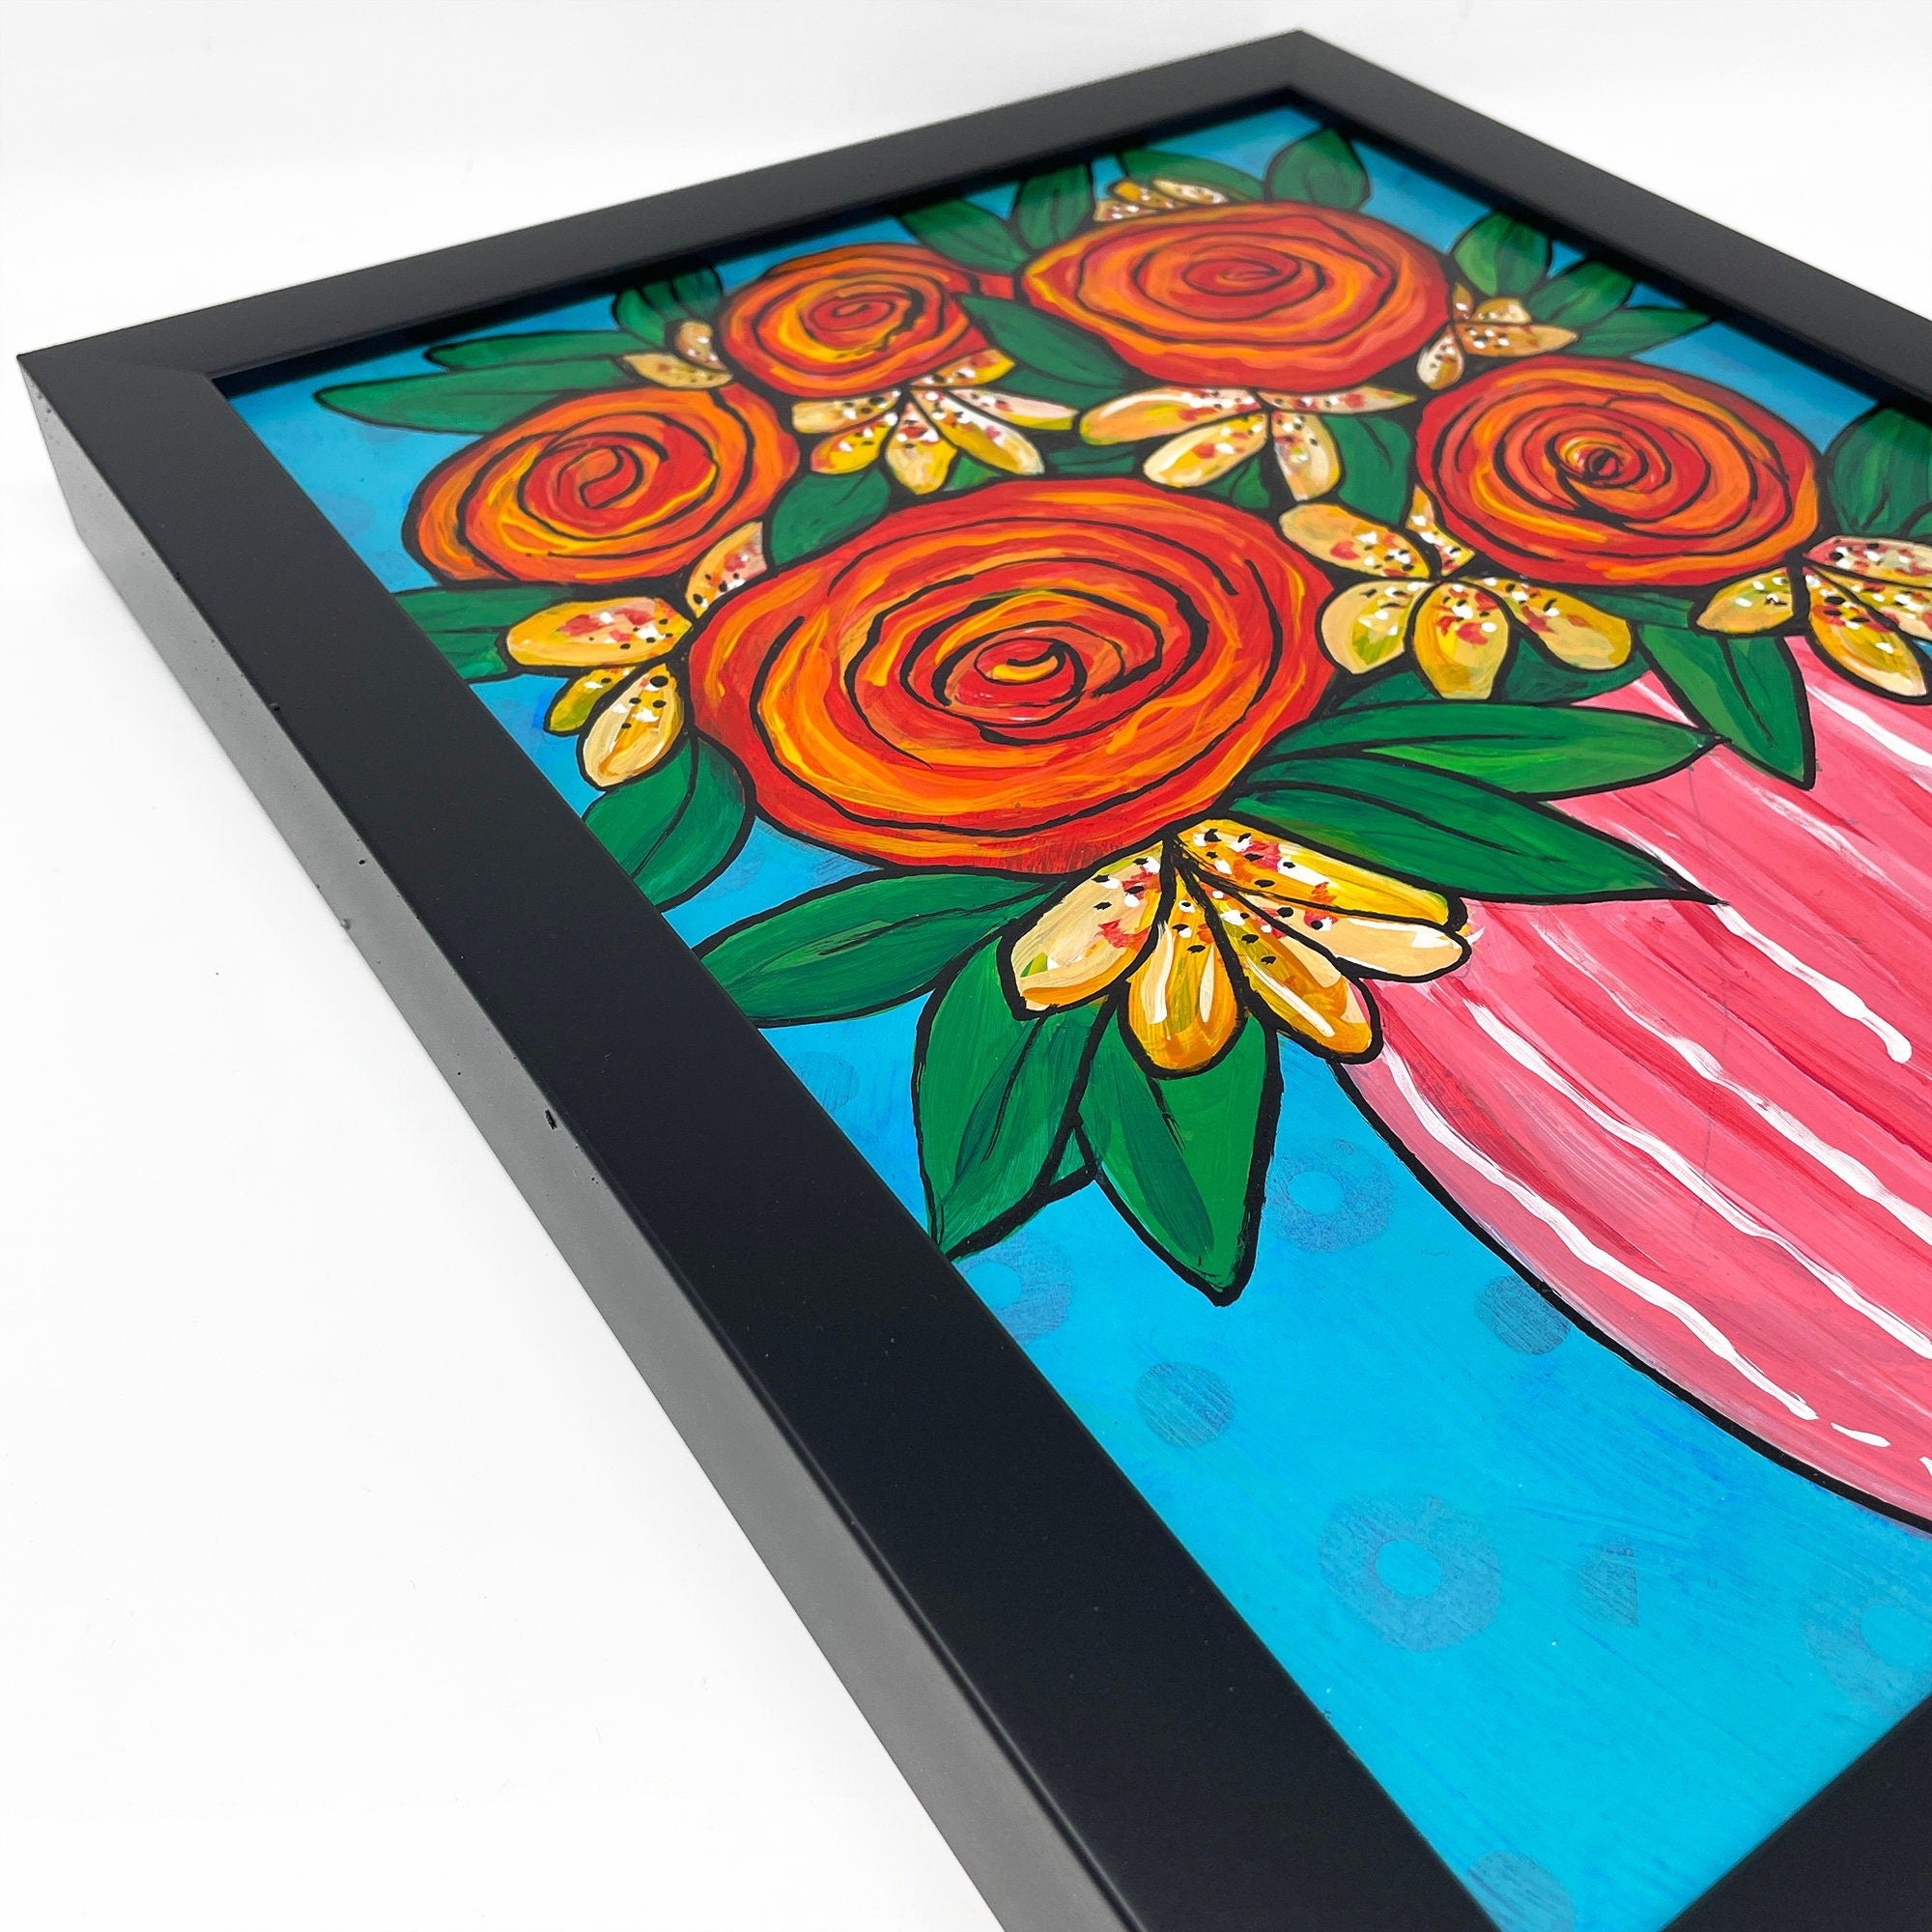 Original Rose and Lily Painting - Vase of Roses and Lillies Still Life - Acrylic Painting in Black Frame - Colorful Cheerful Flower Wall Art